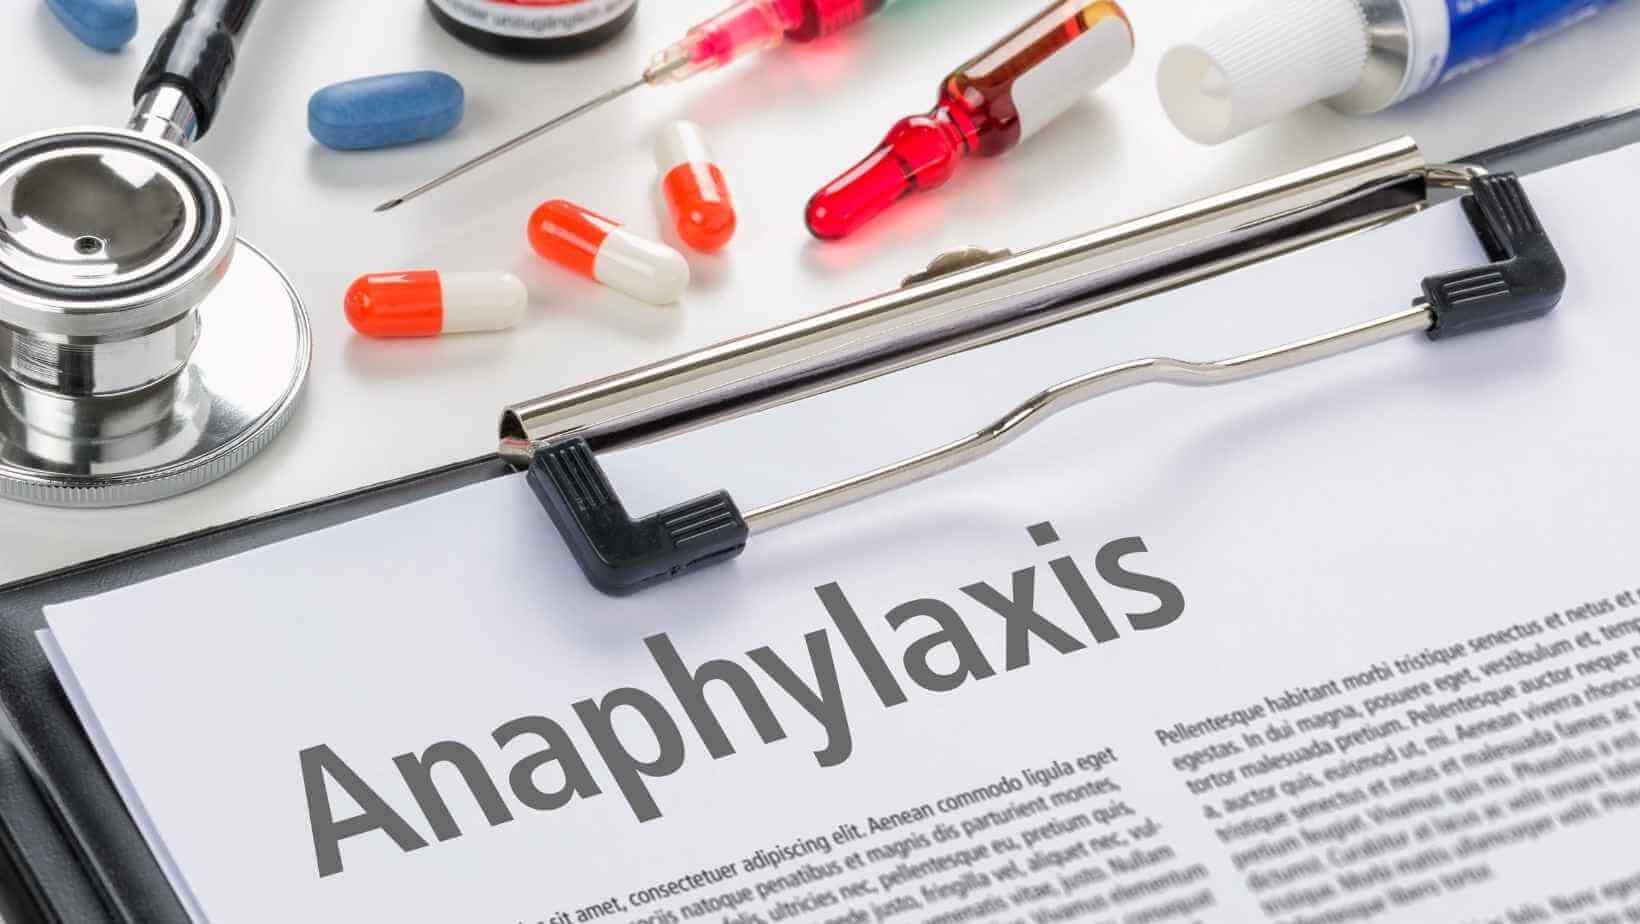 Another reminder to - Allergy & Anaphylaxis Australia